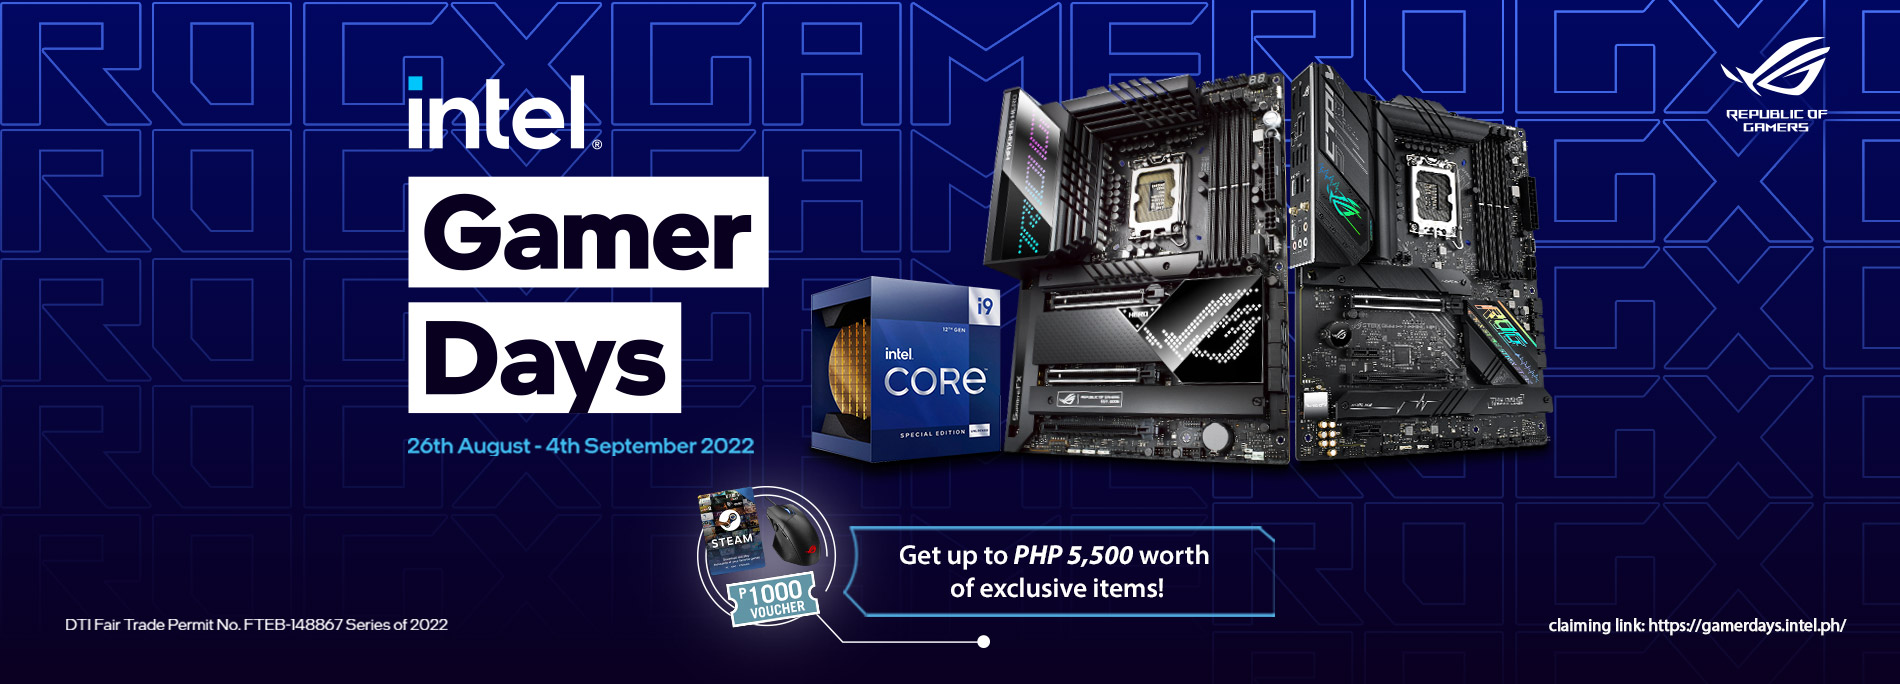 Register your Intel motherboard purchase & get your gift here.